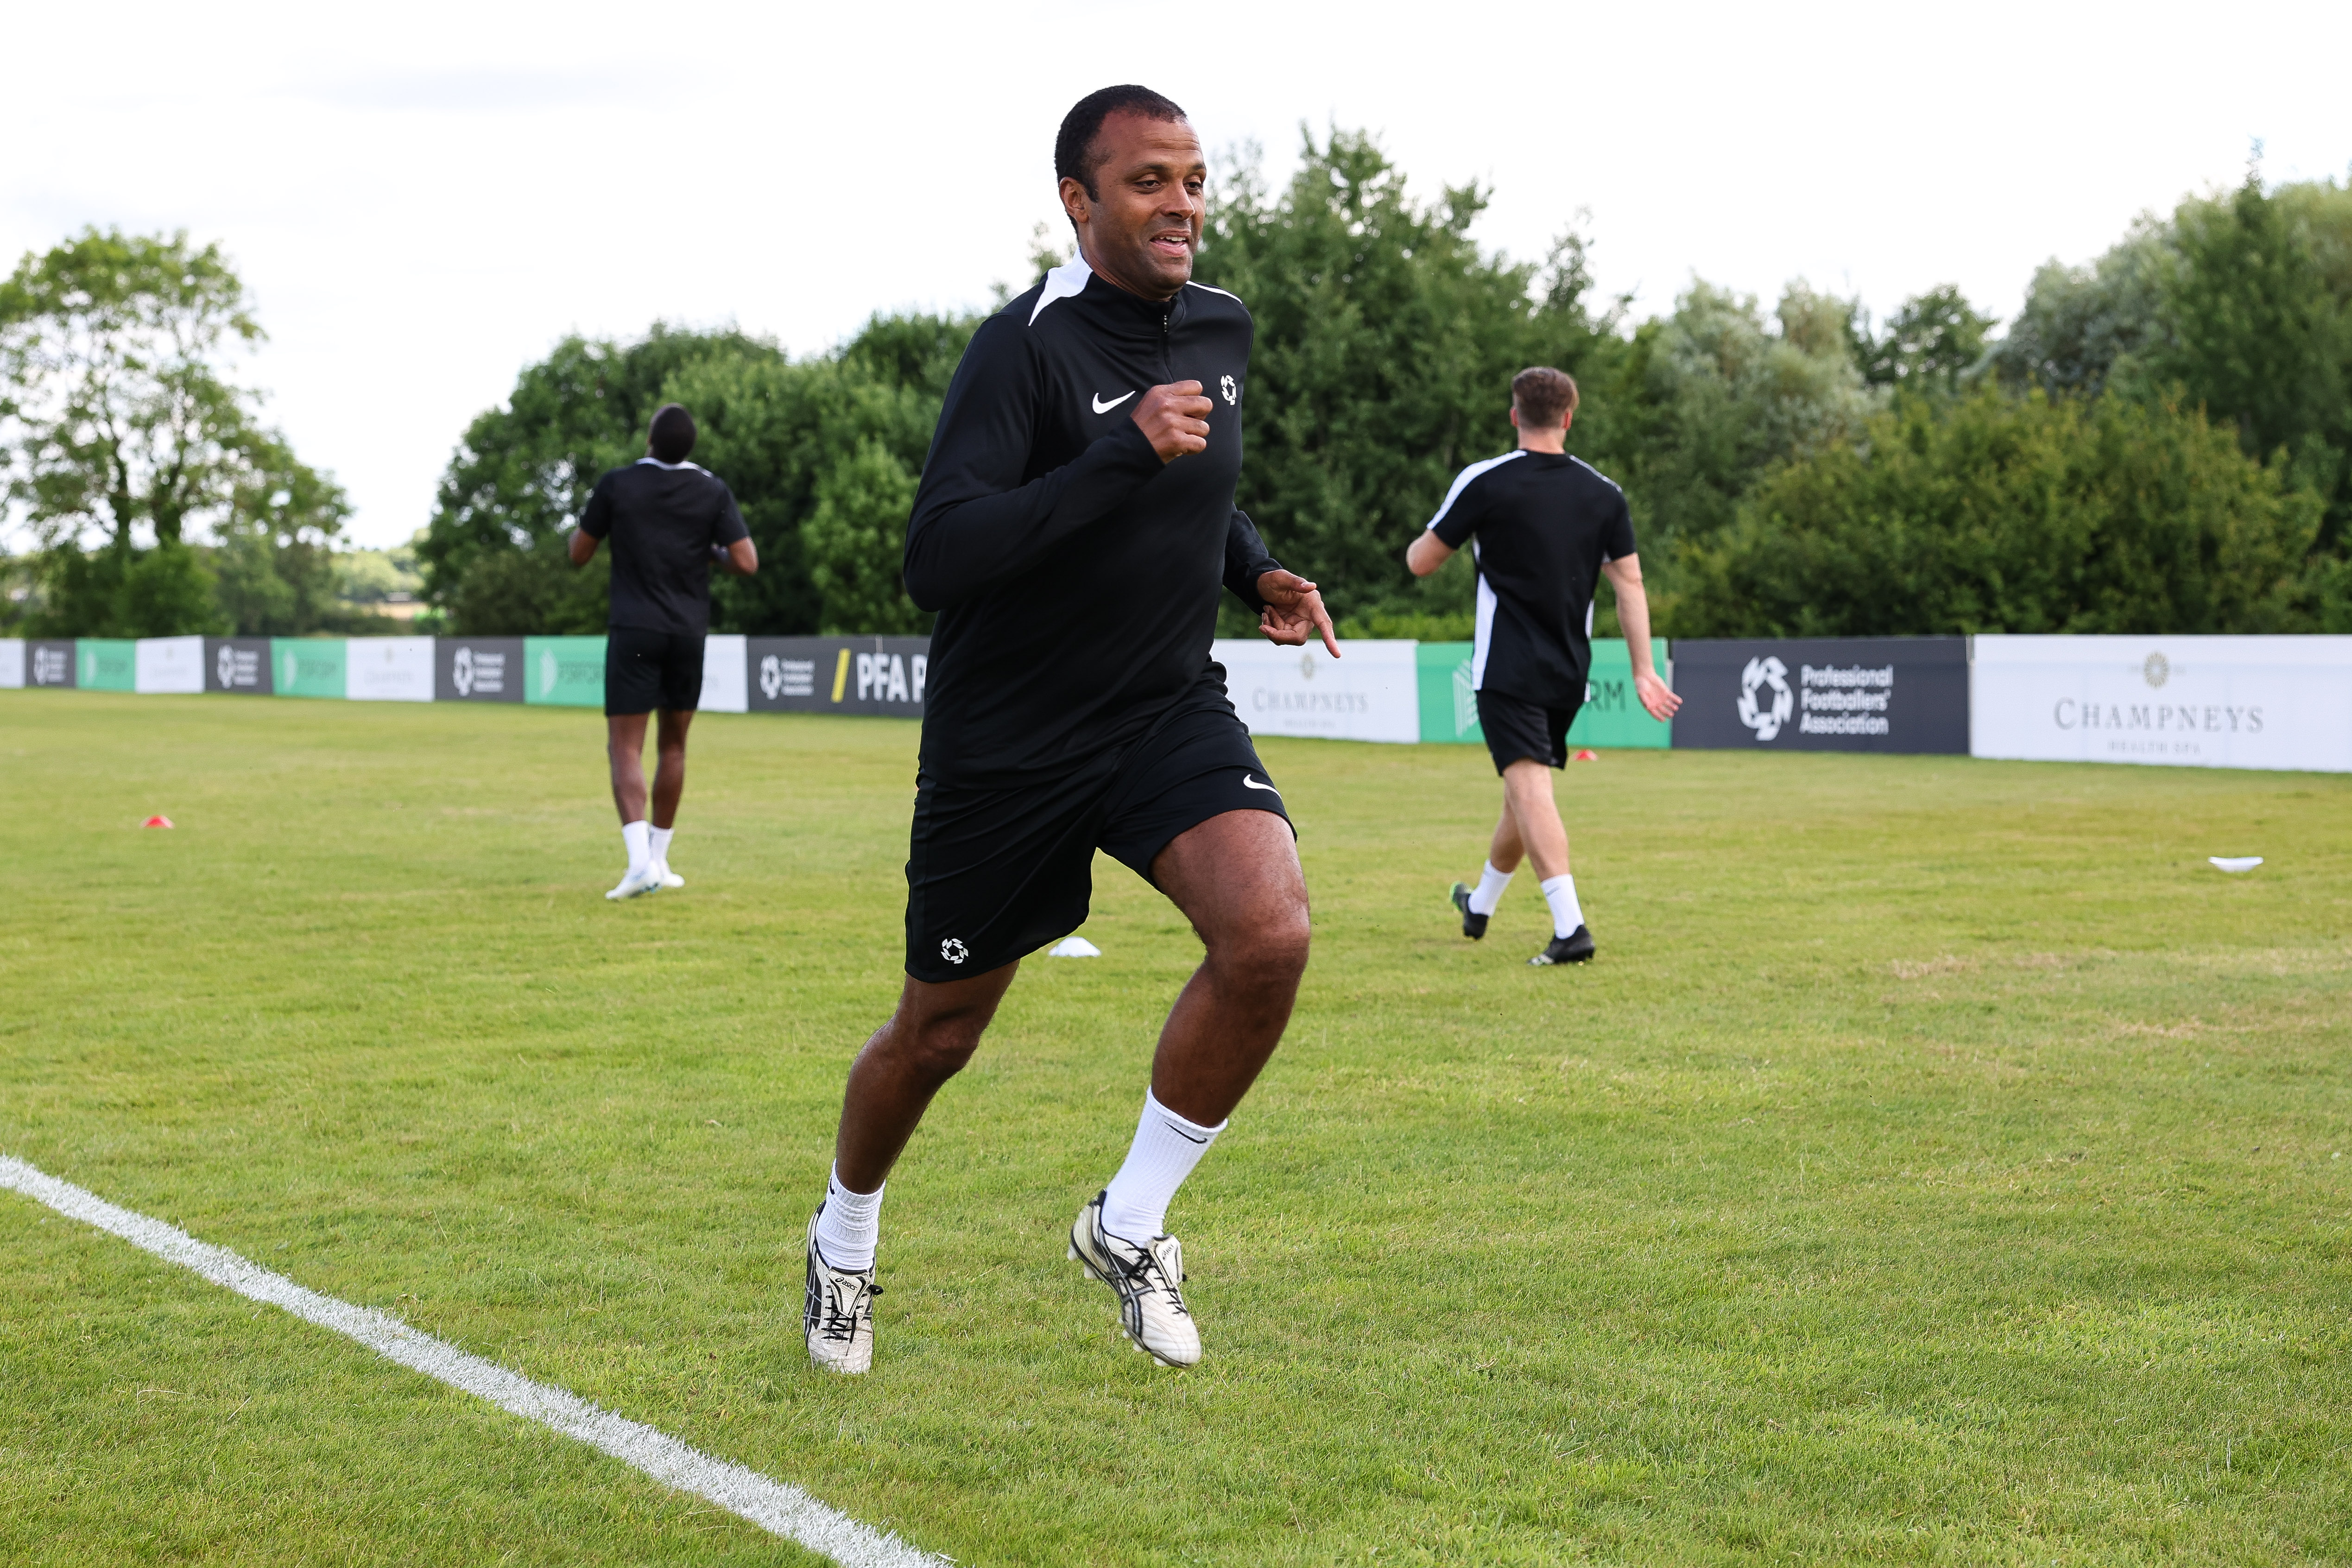 PFA chief executive Maheta Molango joins in a training session at a camp for out-of-contract players in Leicestershire